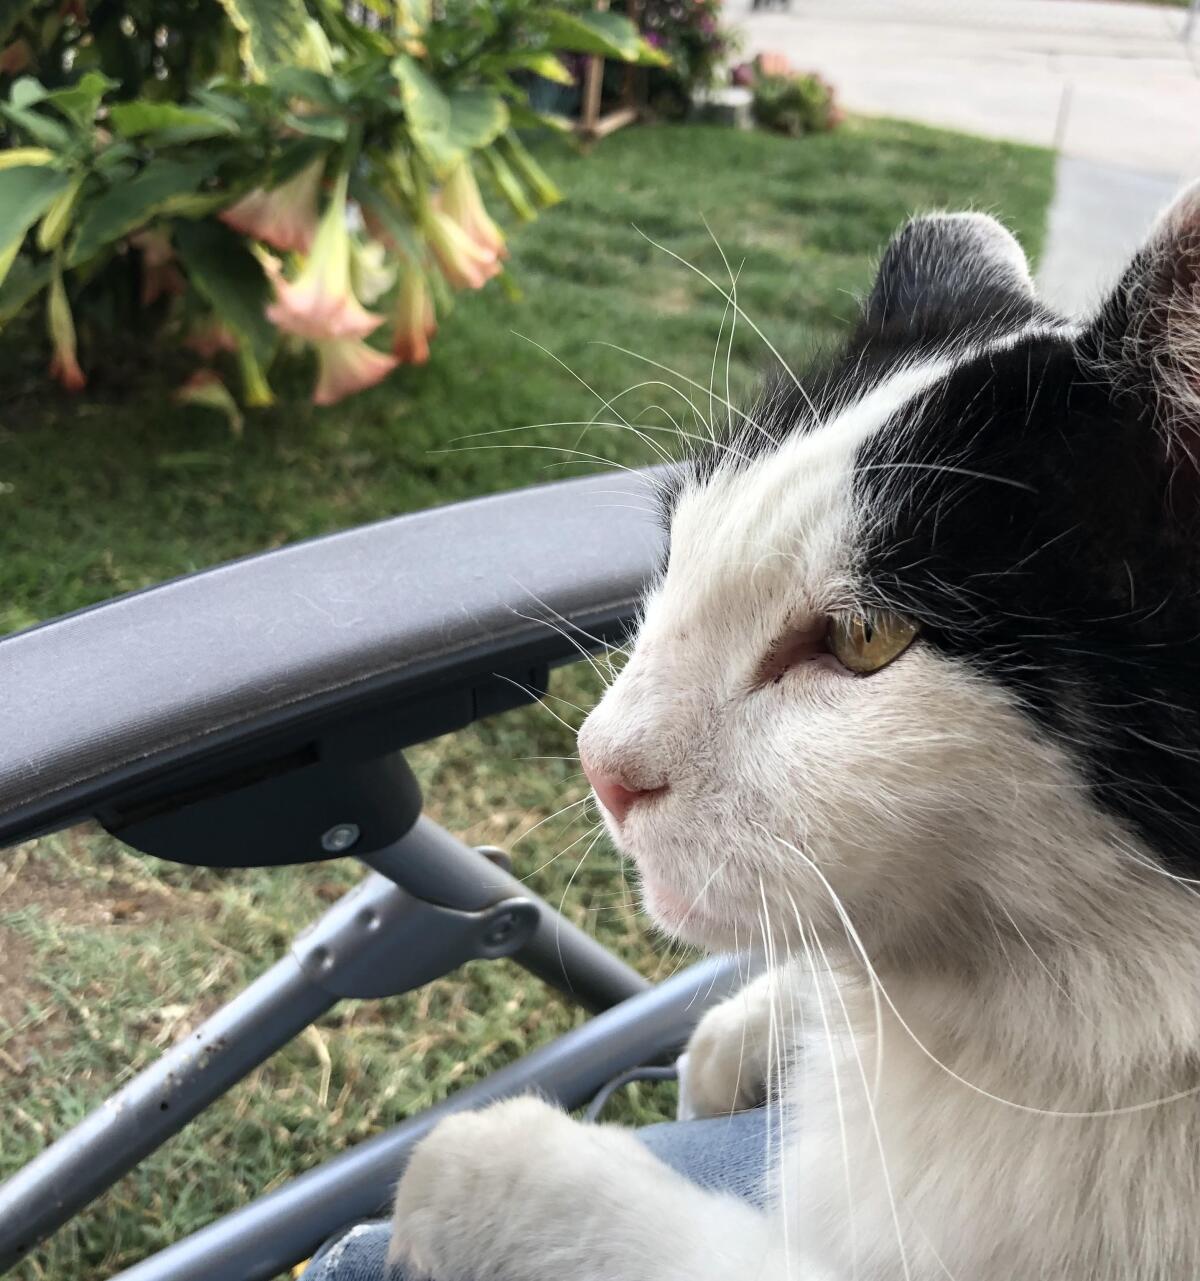 A black and white cat sits on a lawn chair outdoors.